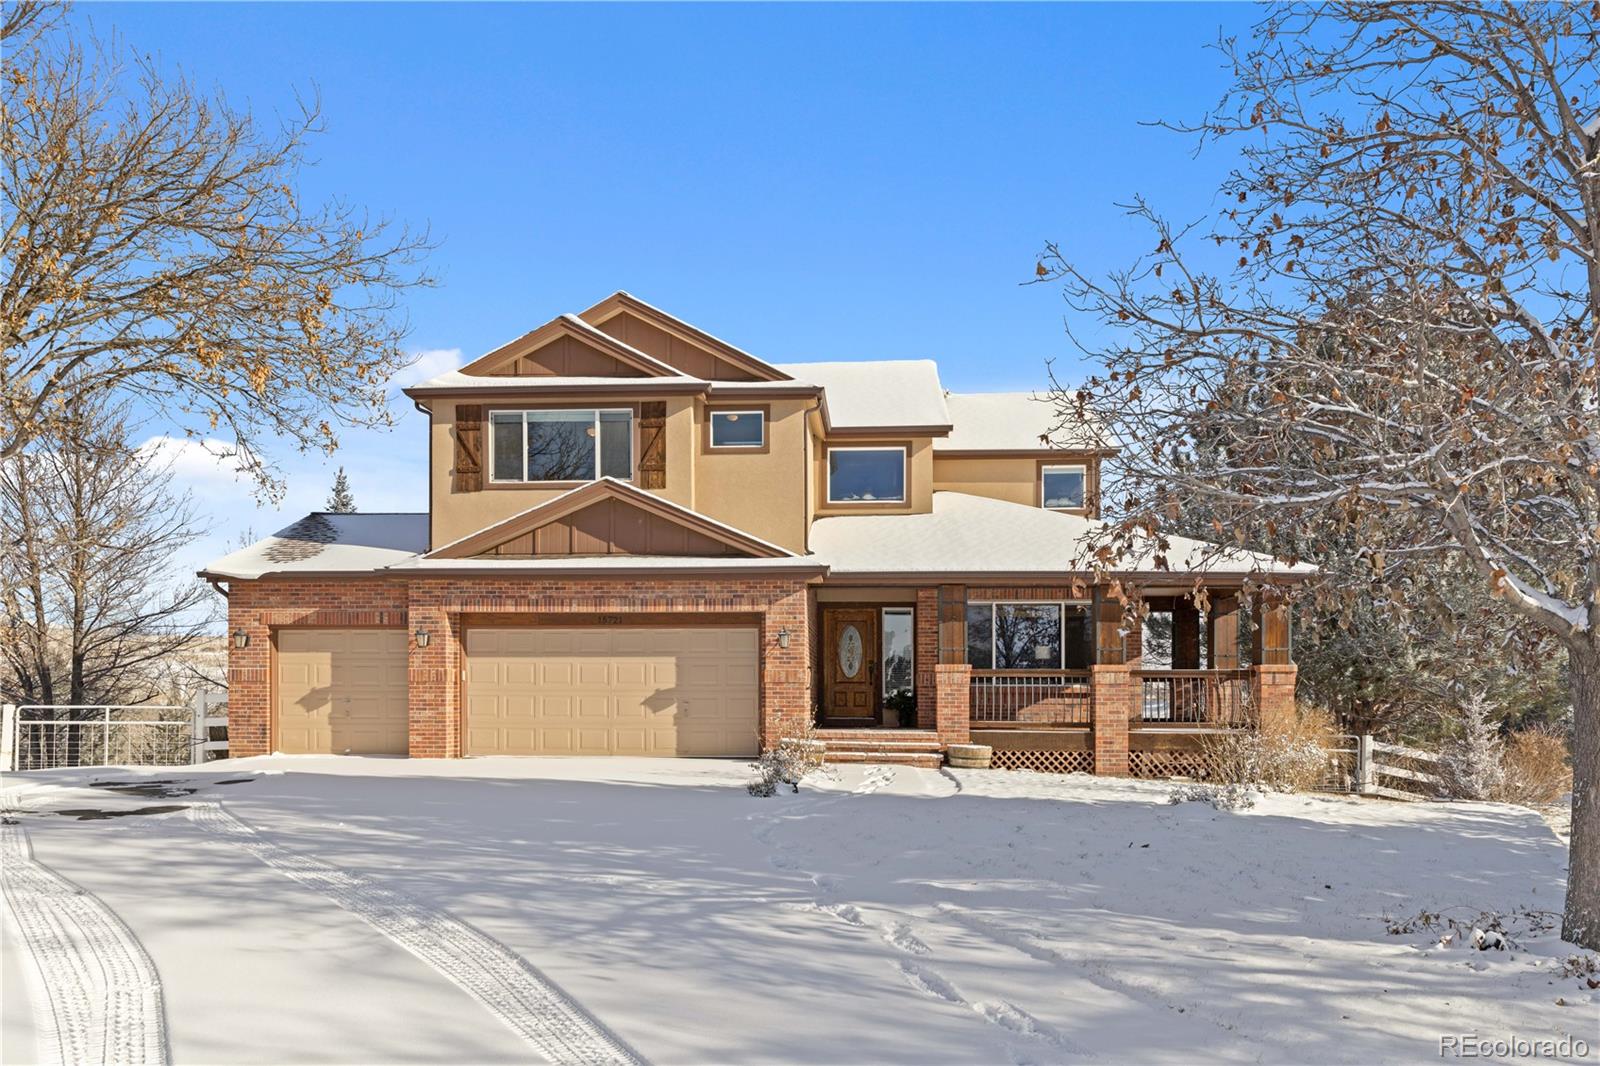 15721 w 79th place, arvada sold home. Closed on 2024-02-29 for $1,100,000.